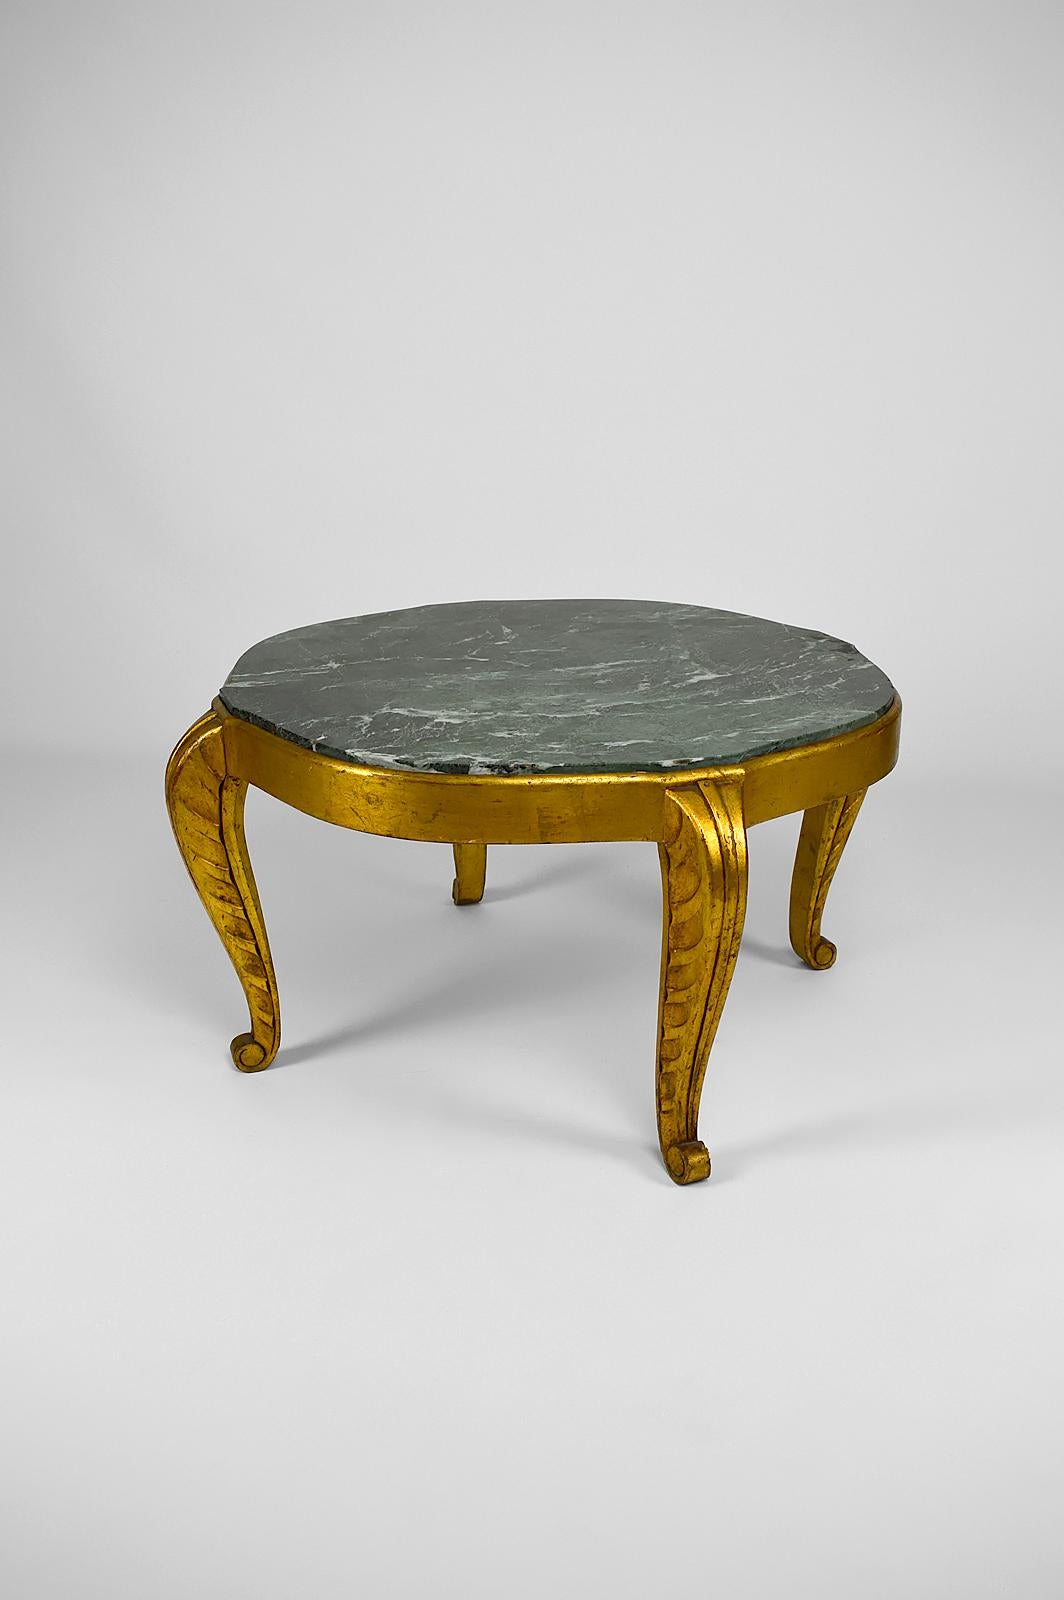 Gilded Side Table with Marble Top by Maison Jansen, Neoclassical Art Deco, 1940s For Sale 1